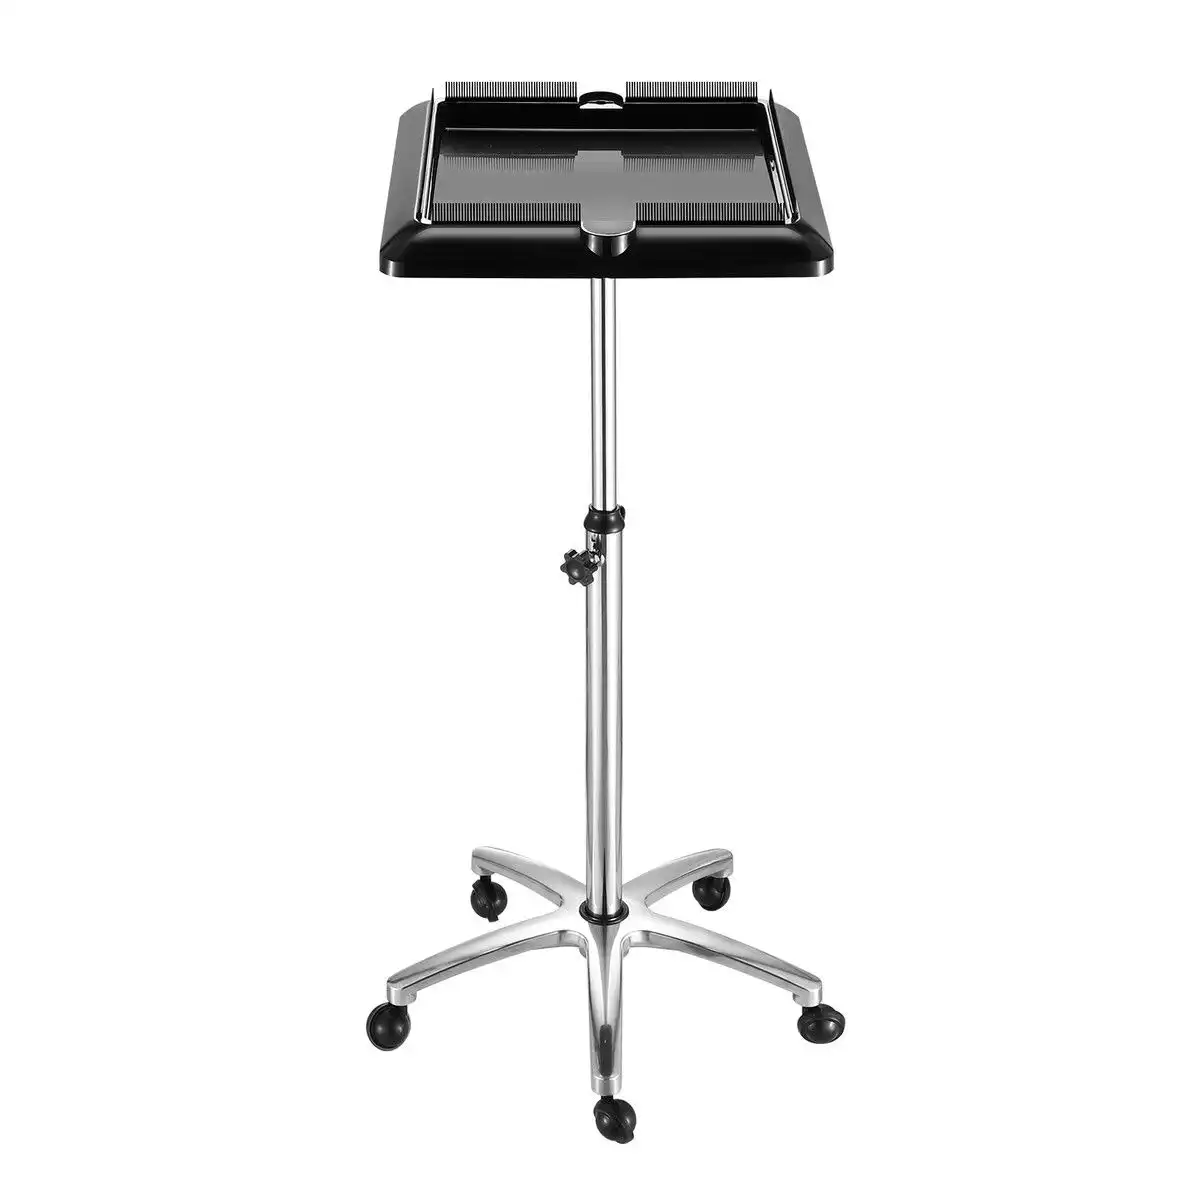 Ausway Hair Salon Trolley Hairdressing Storage Cart Beauty Tool Extension Colouring Tattoo Stand on Wheels Rolling Spa Organiser Adjustable